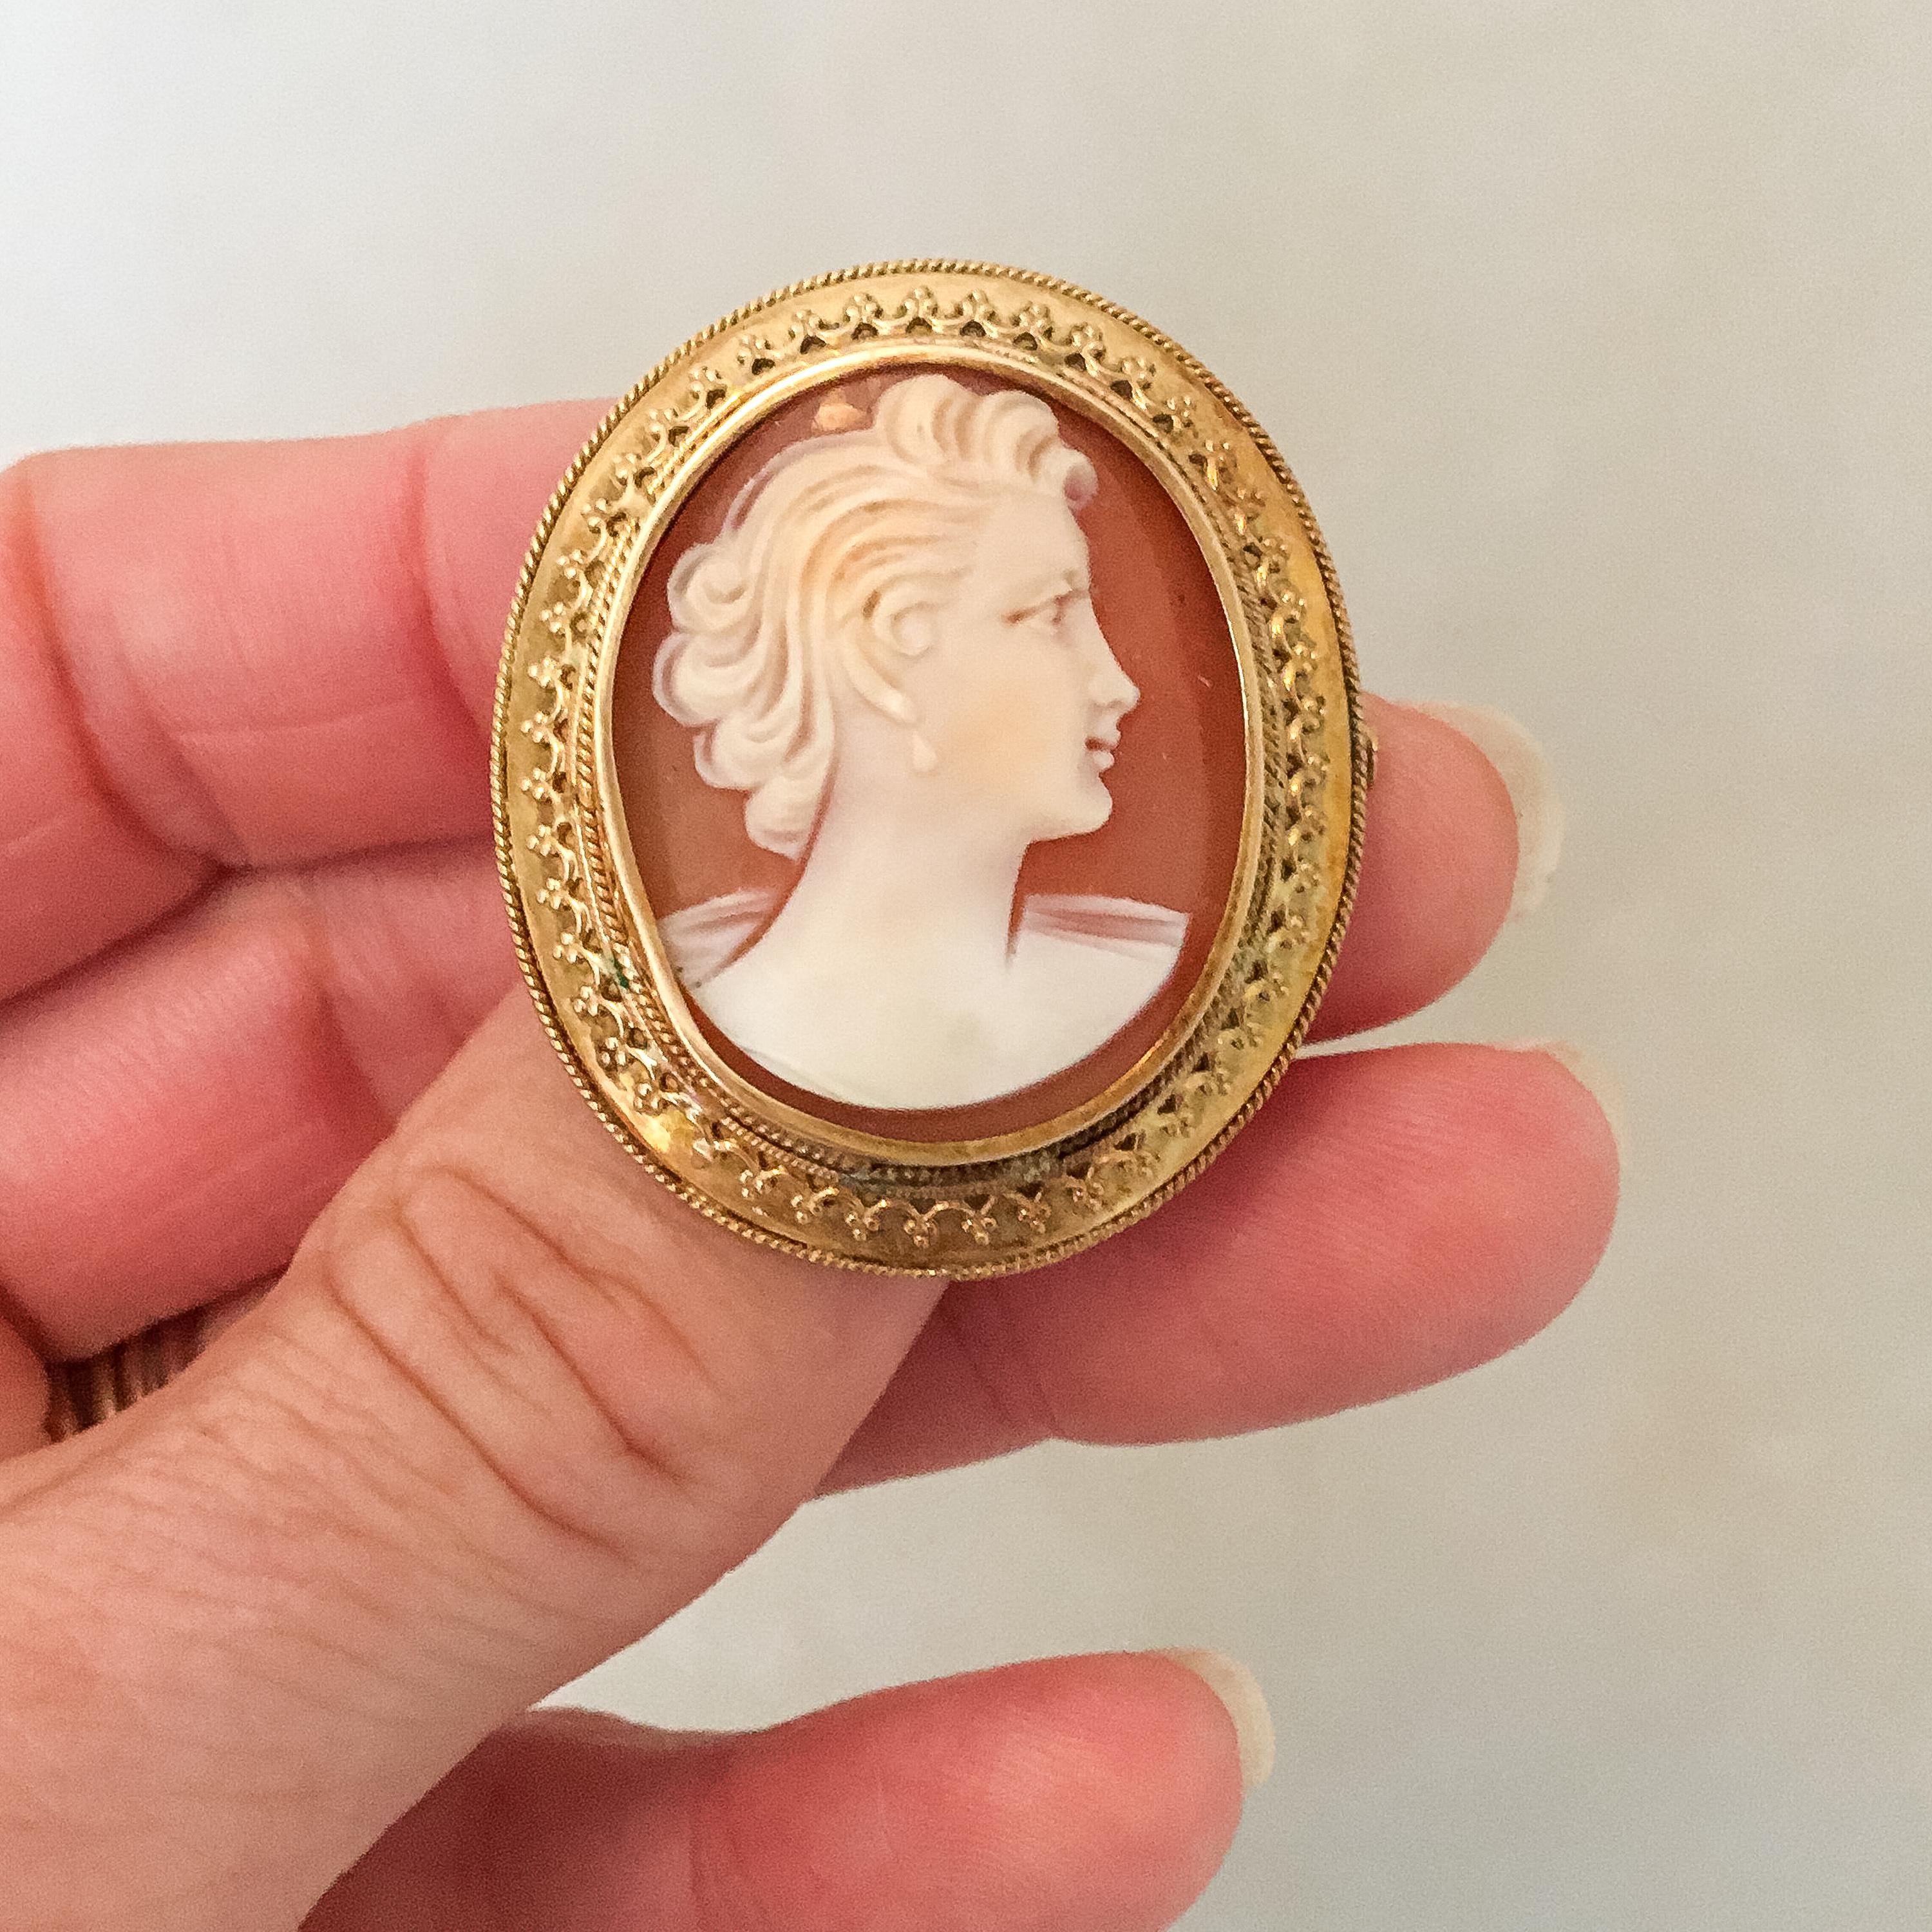 A vintage shell cameo brooch set in a 14 karat gold frame. The shell has a beautiful hue of pinkish and orangish colors and a white relief, and lies in a raised gold rim. The shell is carved into this female silhouette design while it is set in a